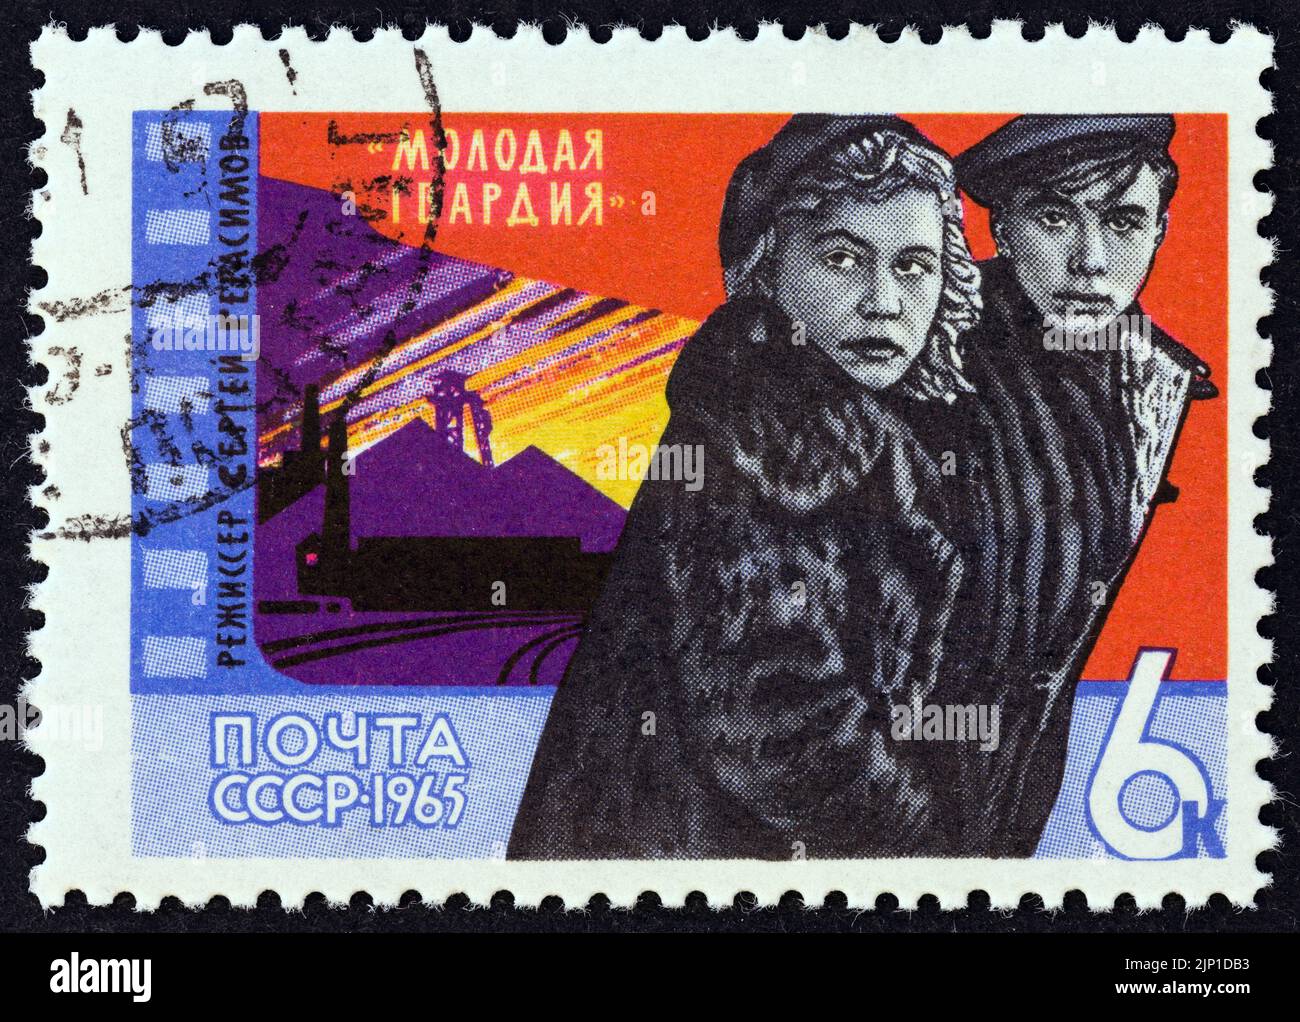 USSR - CIRCA 1965: A stamp printed in USSR from the 'Soviet Cinema Art' issue shows Young Guard (S. Gerasimov, 1948), circa 1965. Stock Photo